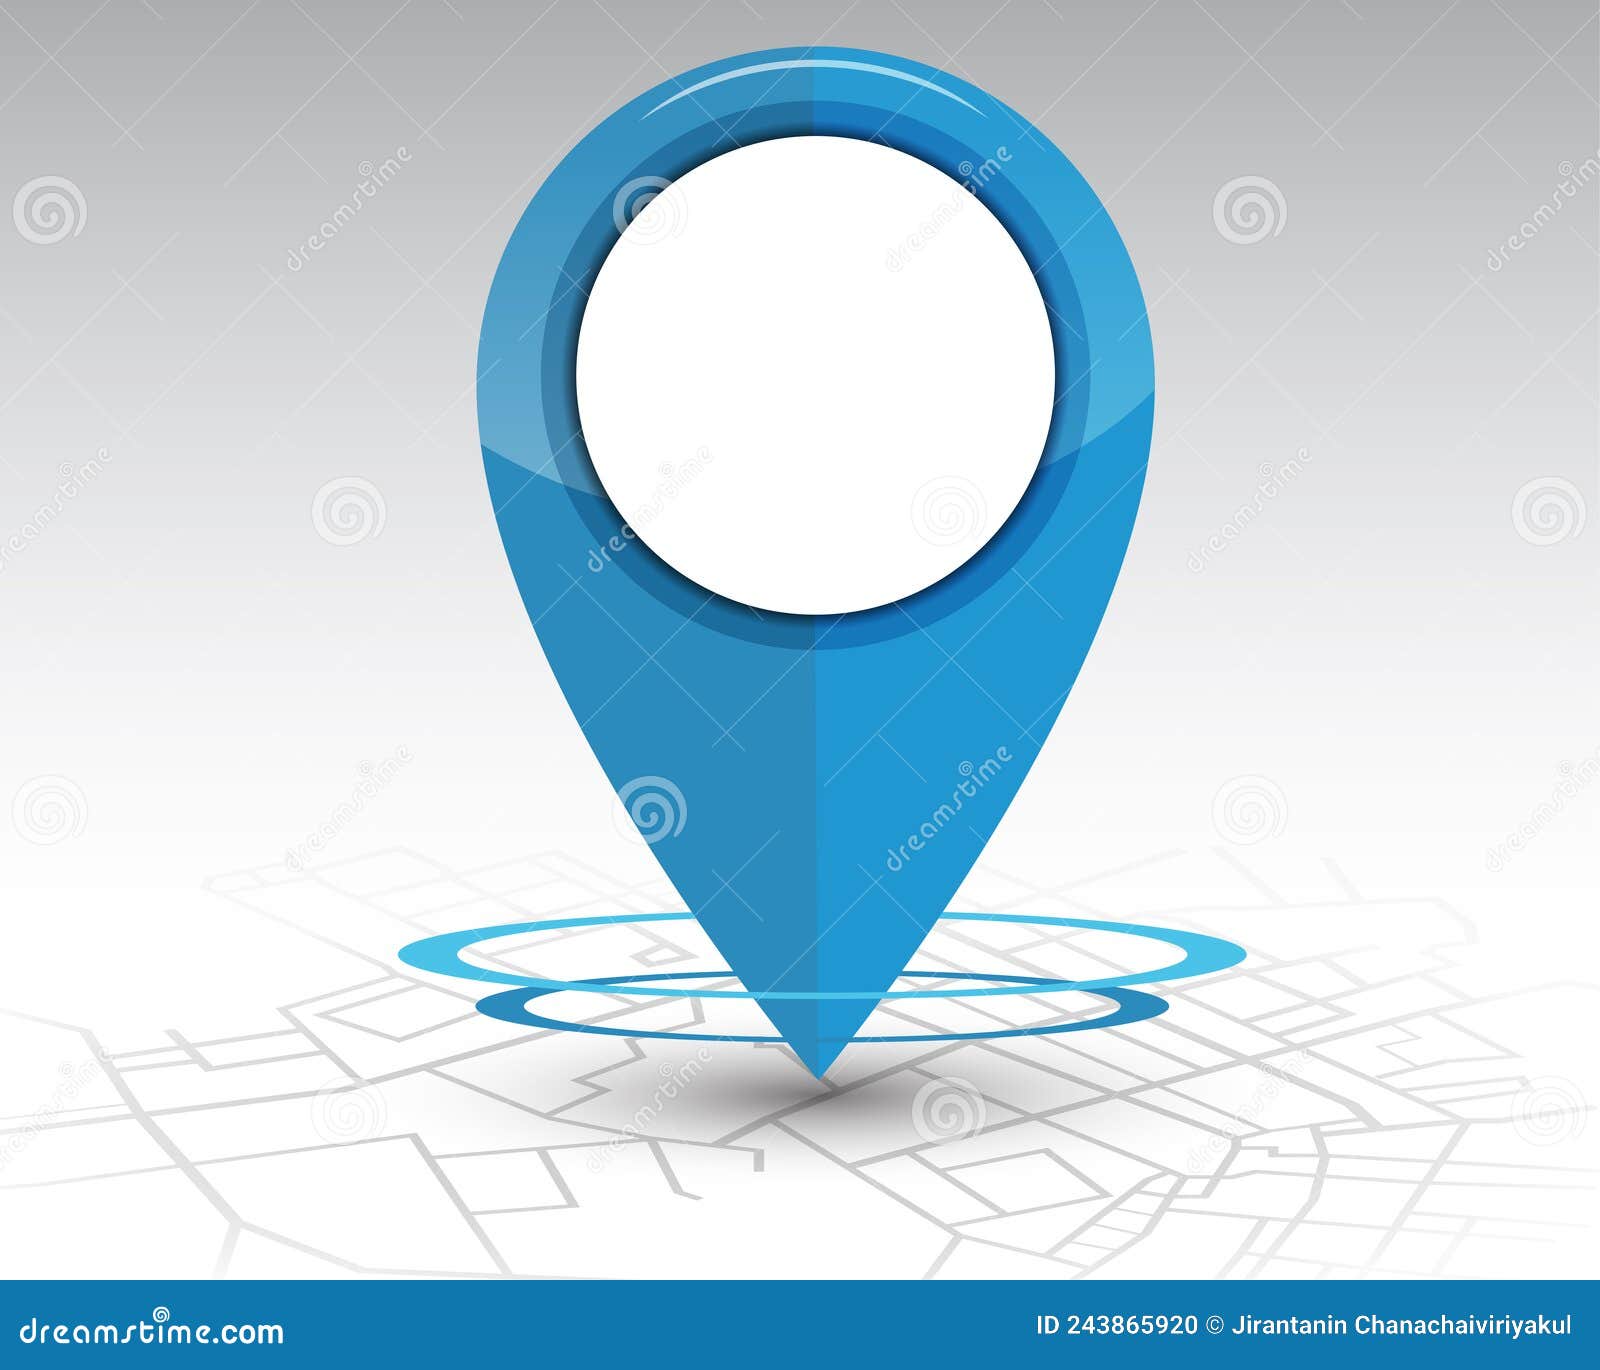 gps pin checking location blue color on map